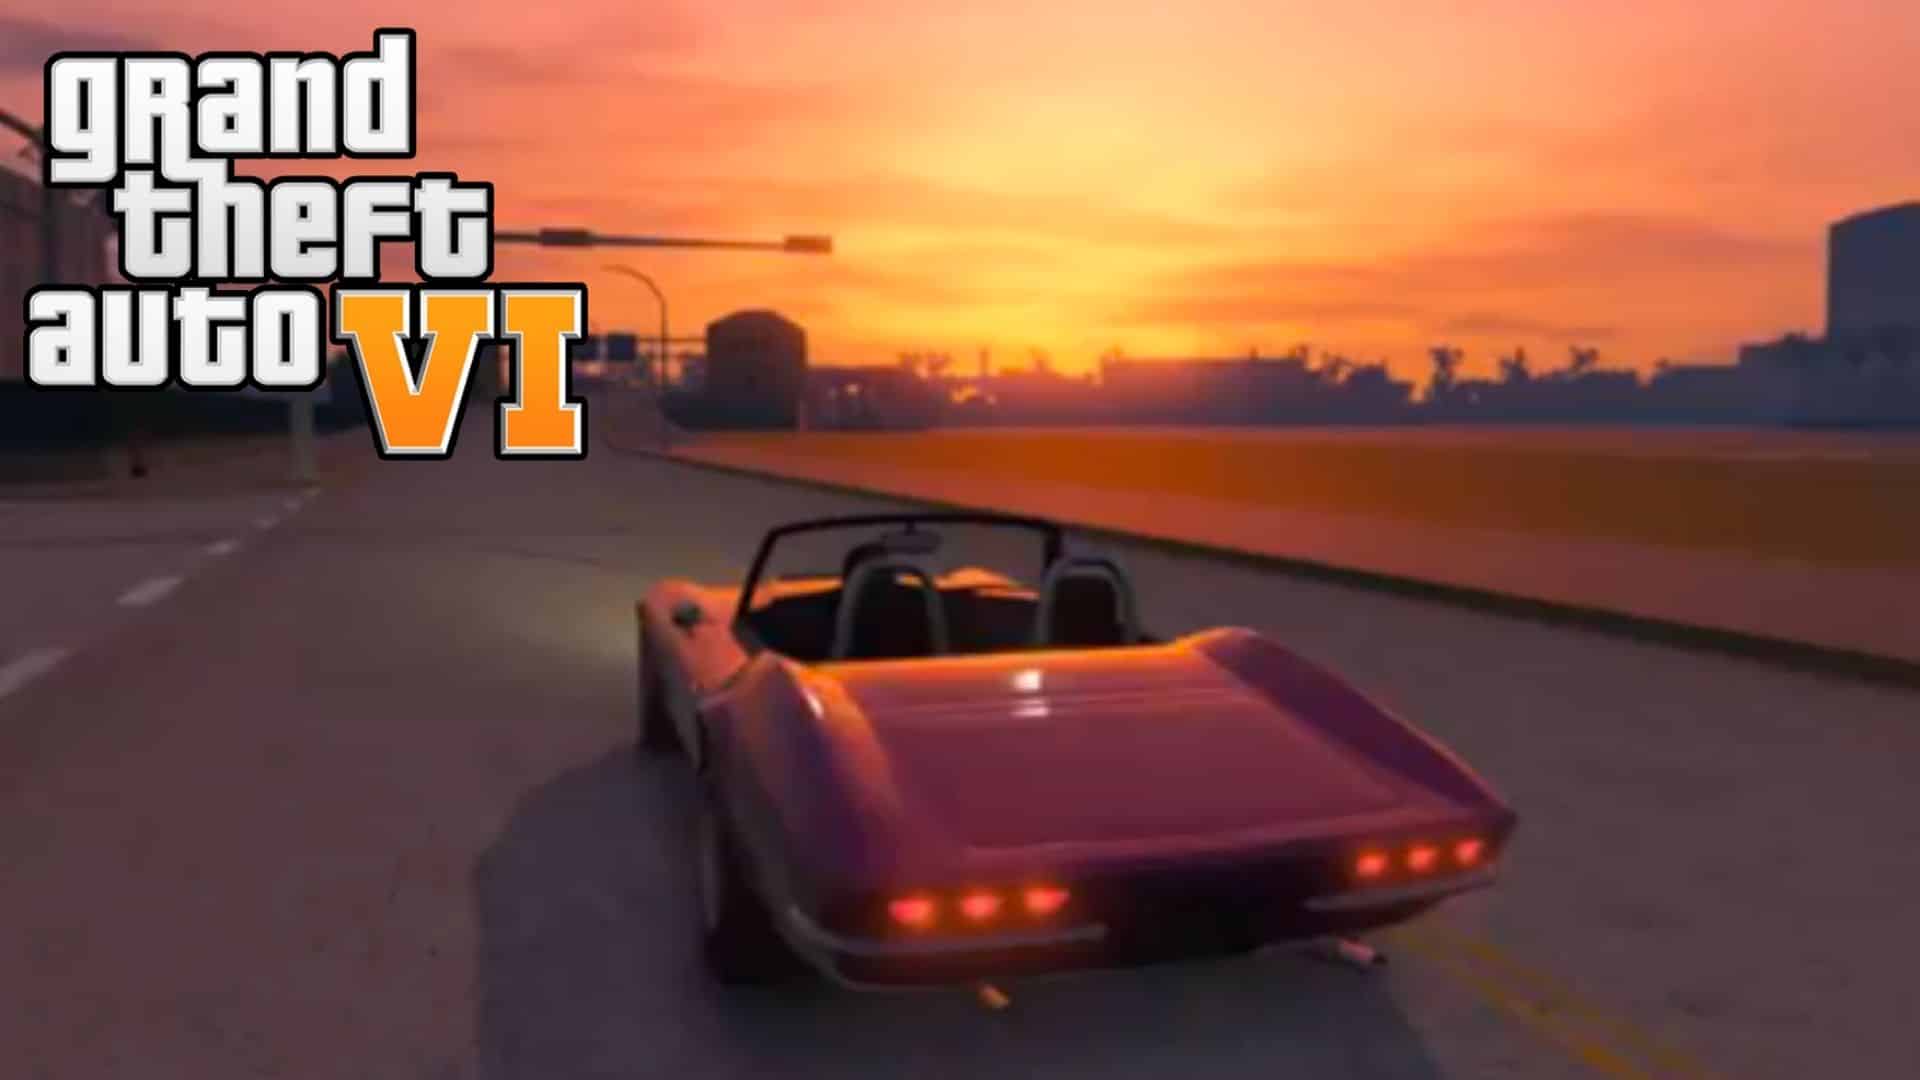 Convertible car in Vice City with GTA 6 logo